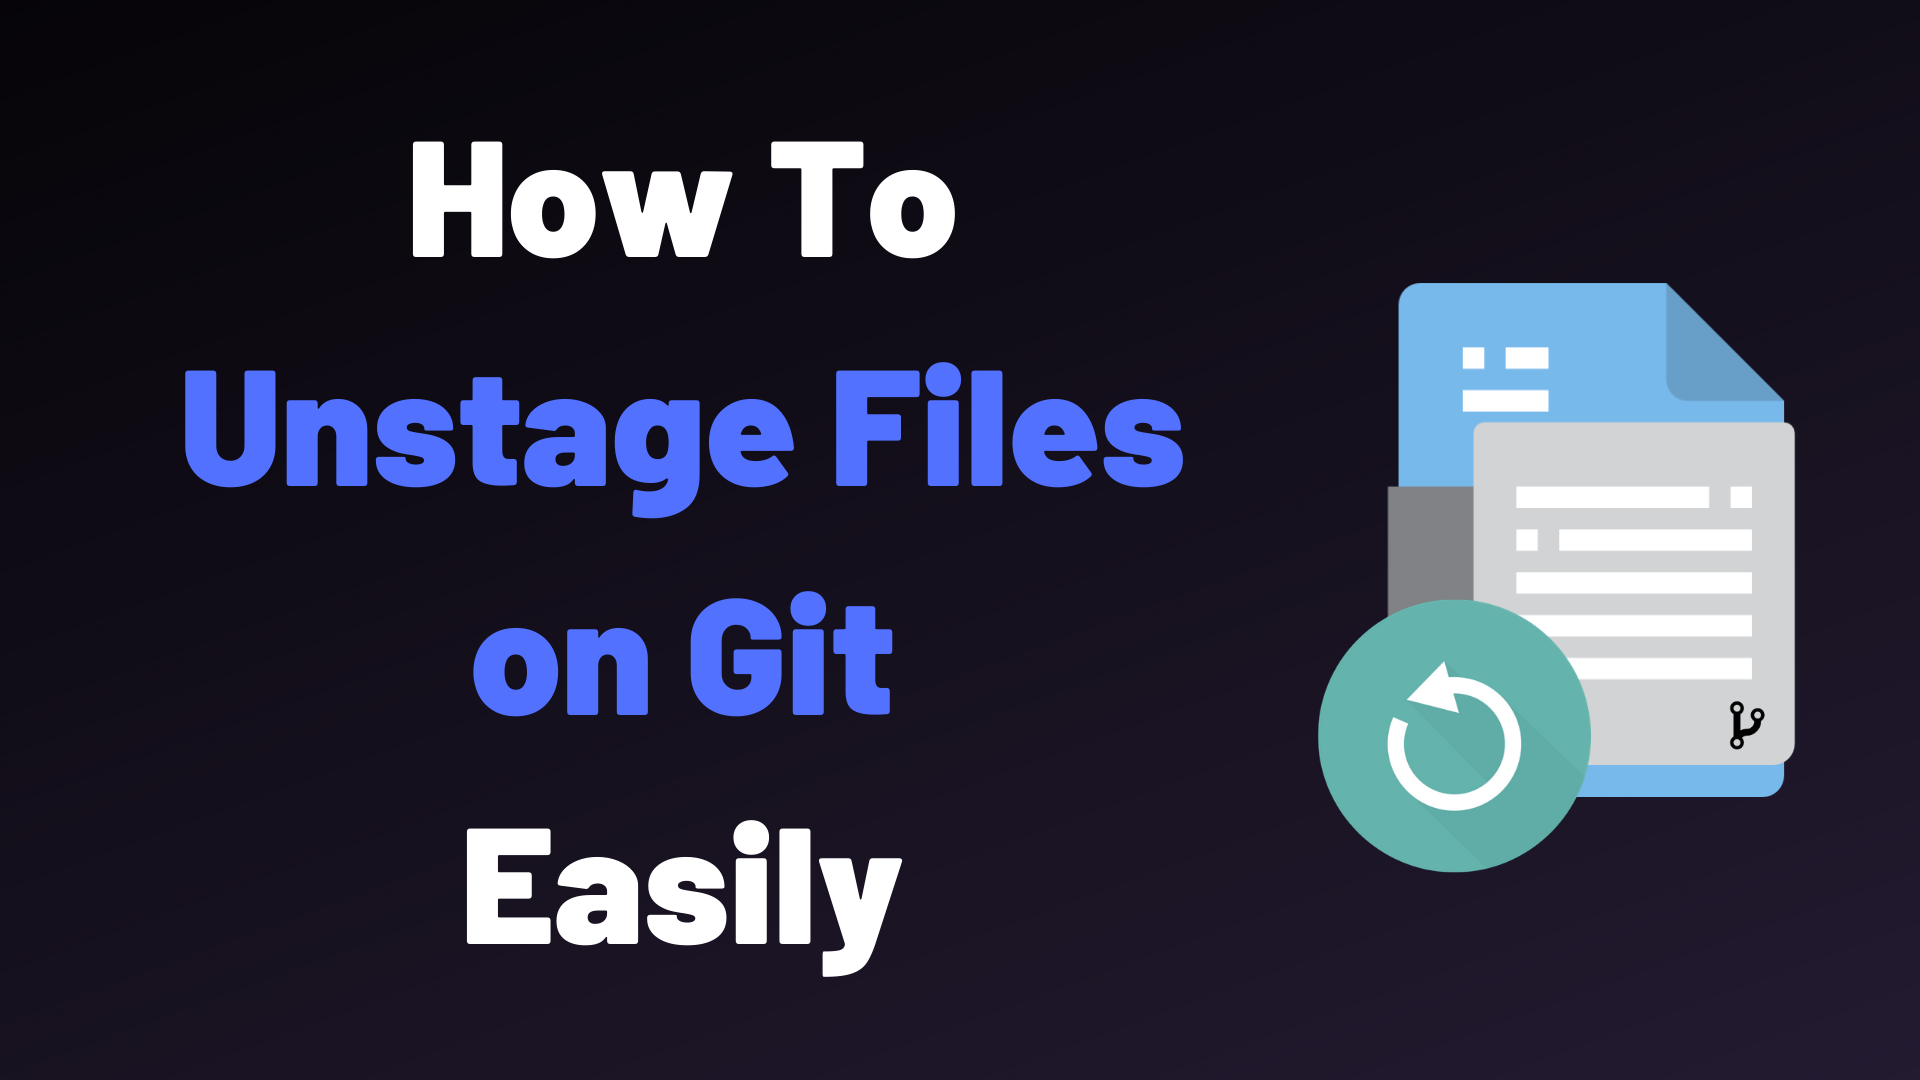 How To Unstage Files on Git